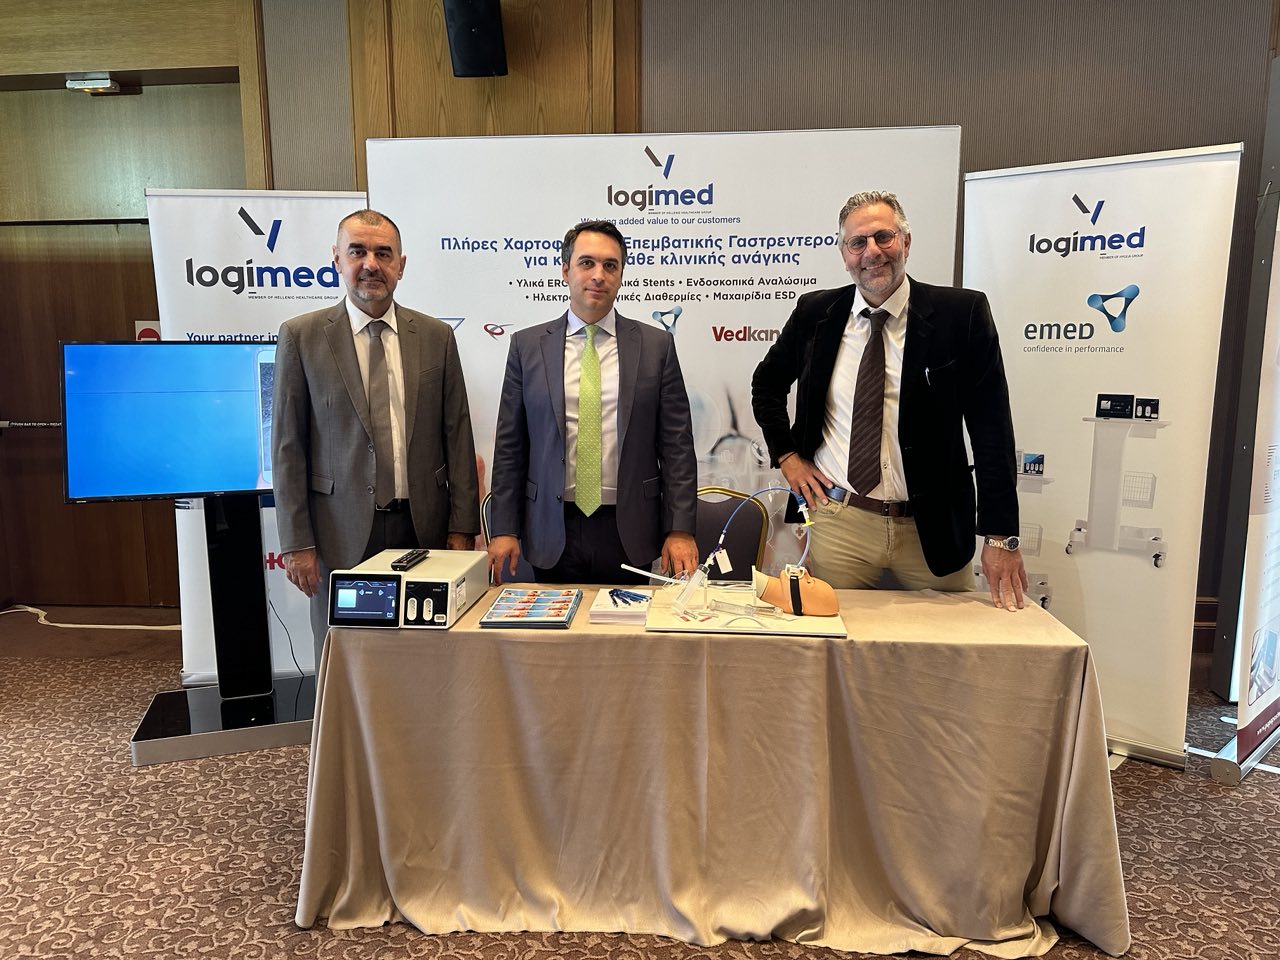 Y-Logimed attended the 15th Hepato-Gastroenterology event which was held on September 22-24 in Ioannina City.